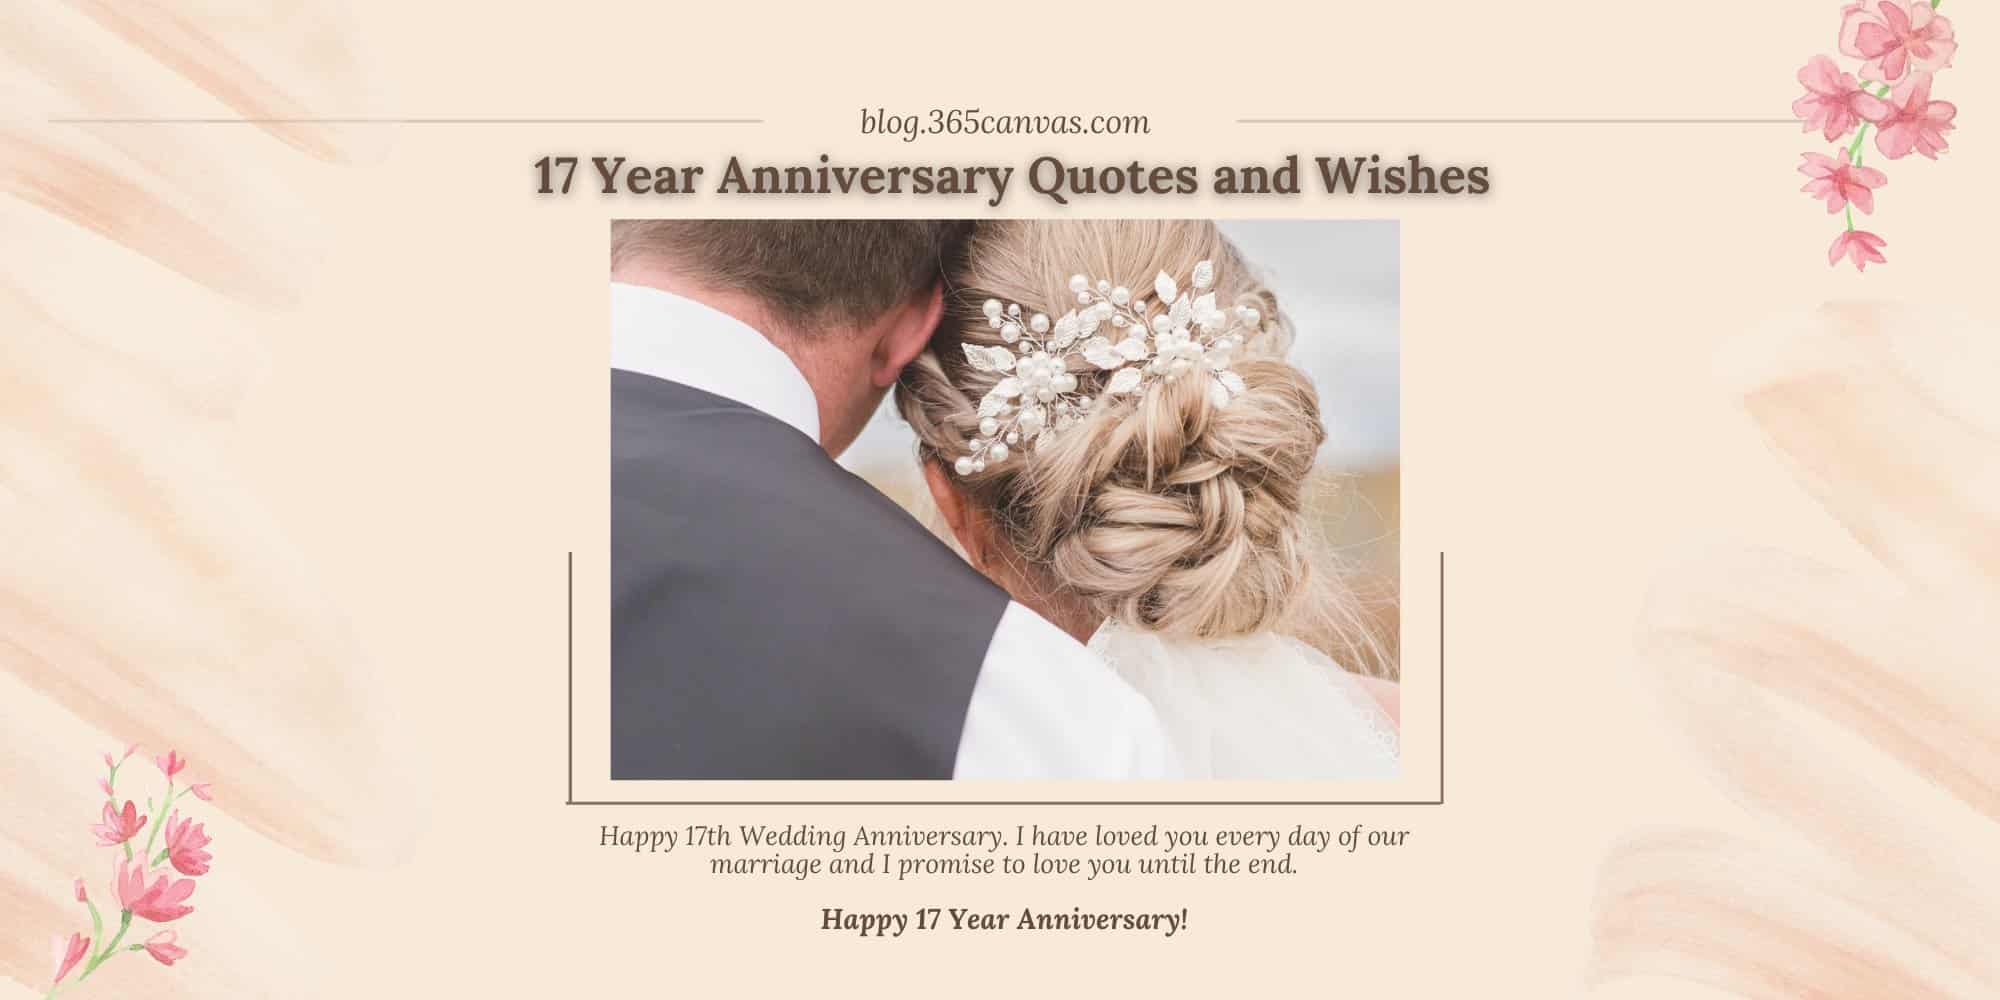 90+ Happy 17th Year Furniture Wedding Anniversary Quotes, Wishes